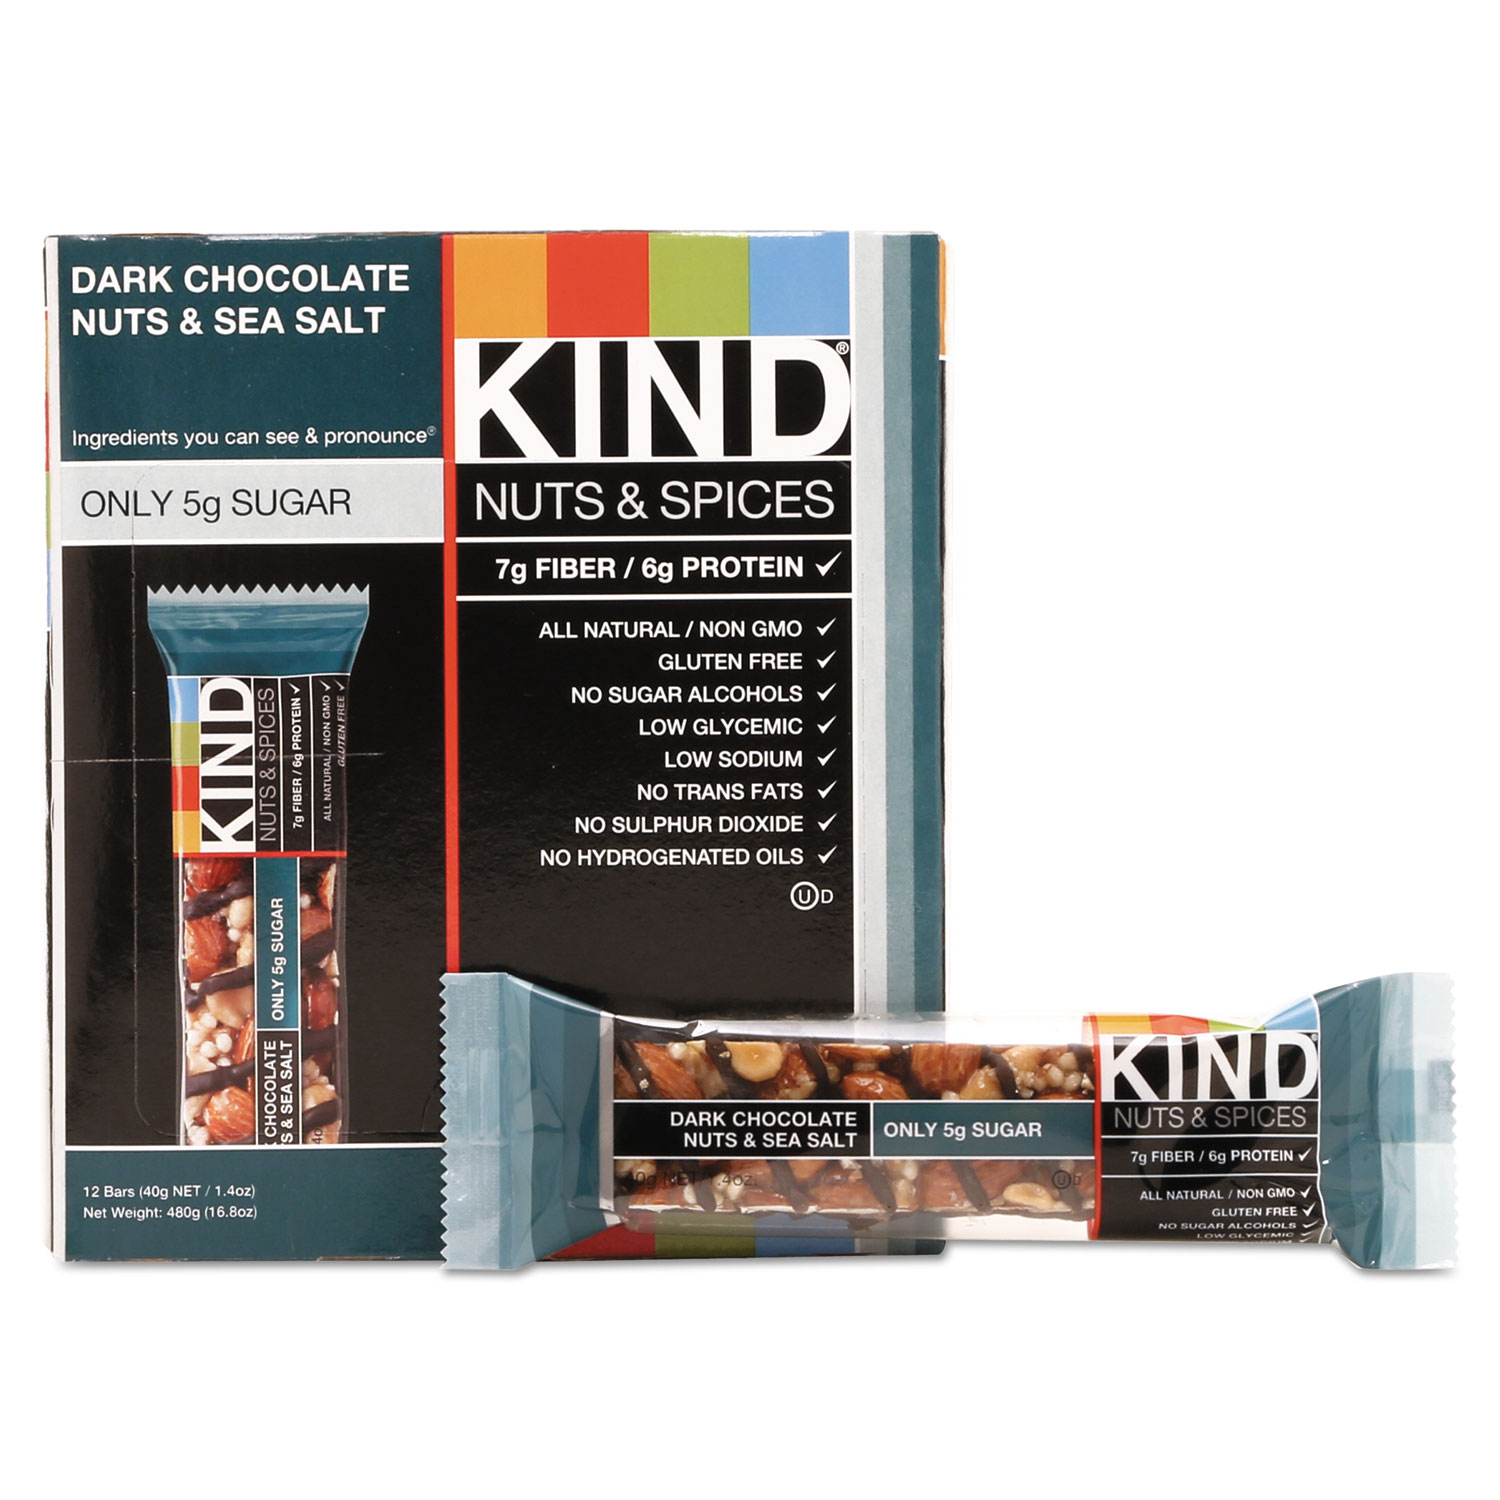  KIND 17851 Nuts and Spices Bar, Dark Chocolate Nuts and Sea Salt, 1.4 oz, 12/Box (KND17851) 